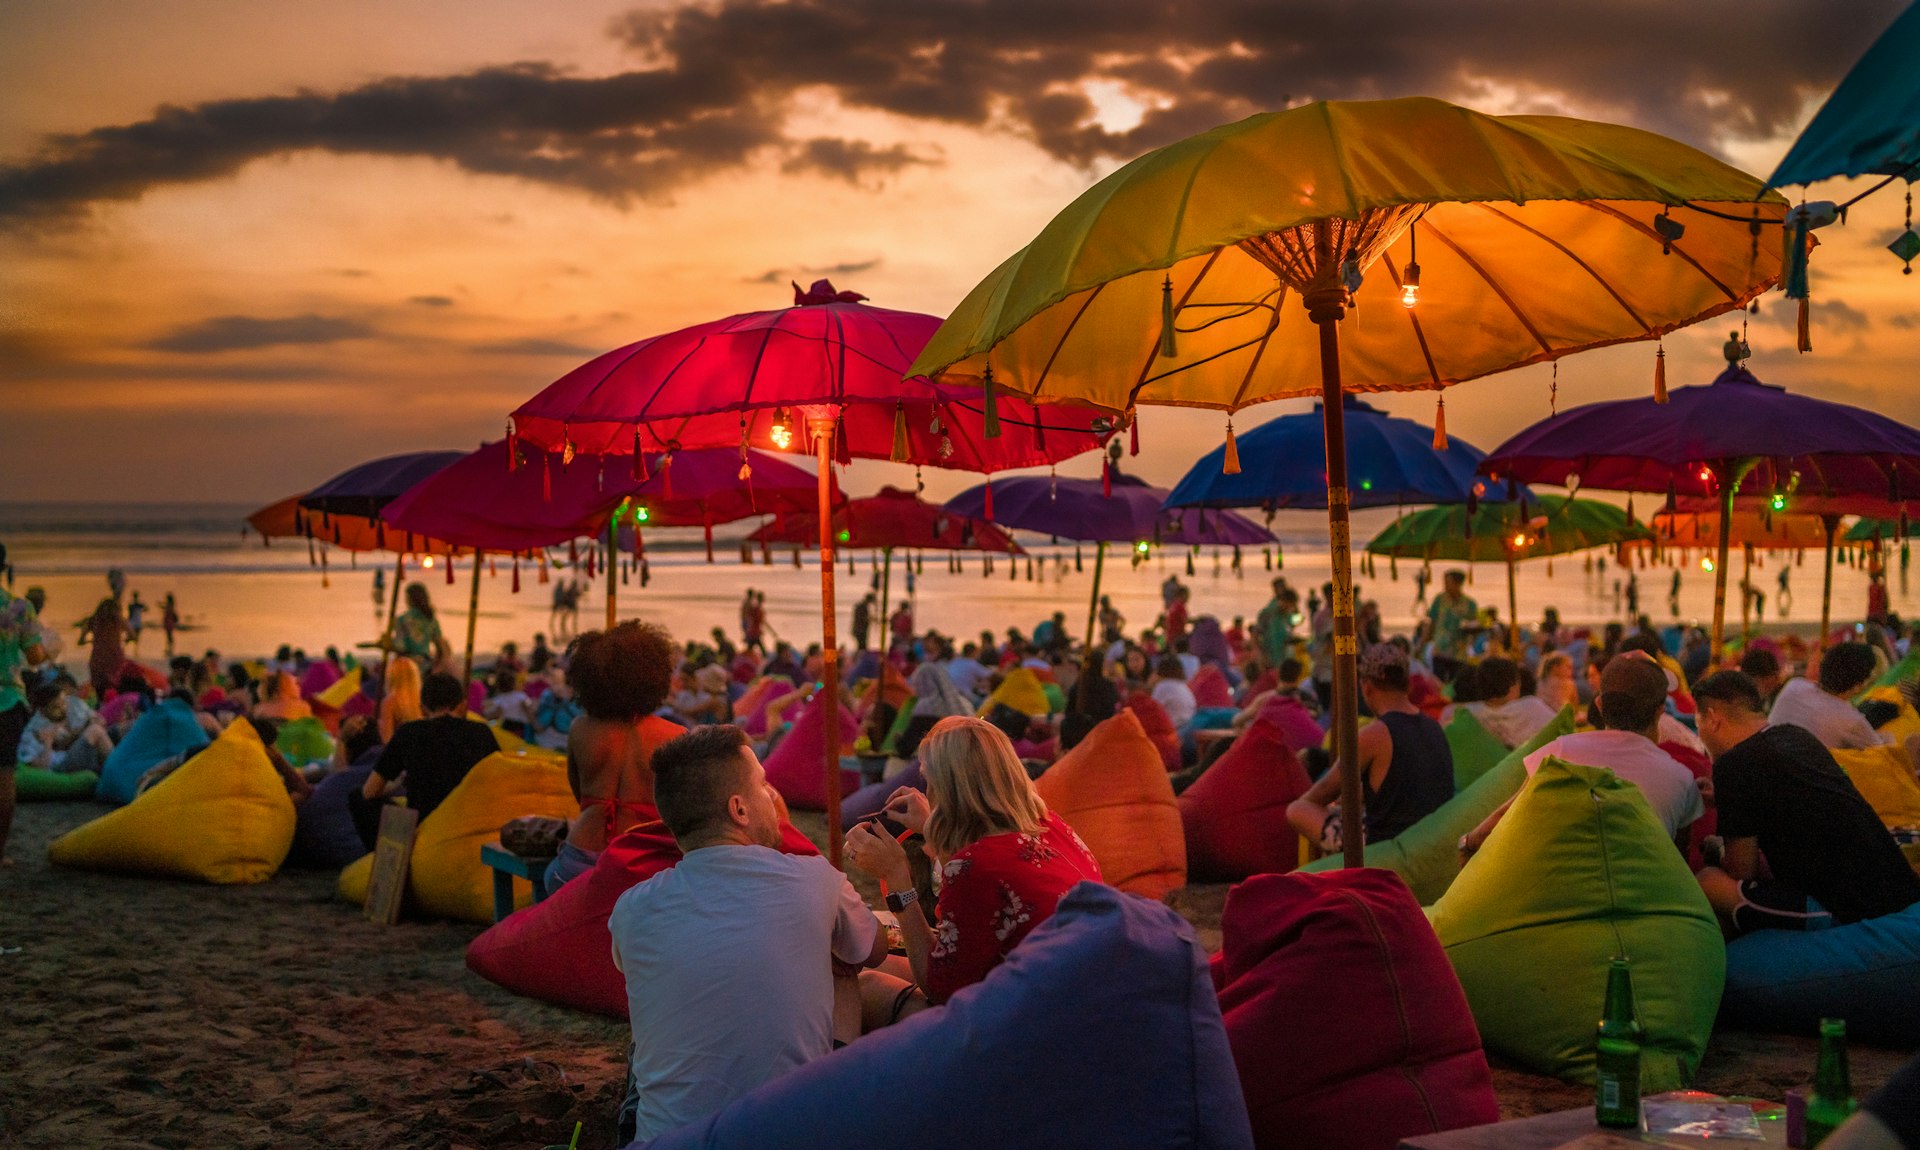 Tourists relaxing and sitting on colorful bean bags, under the umbrellas, and enjoying the sunset at Denpasar beach. Bali